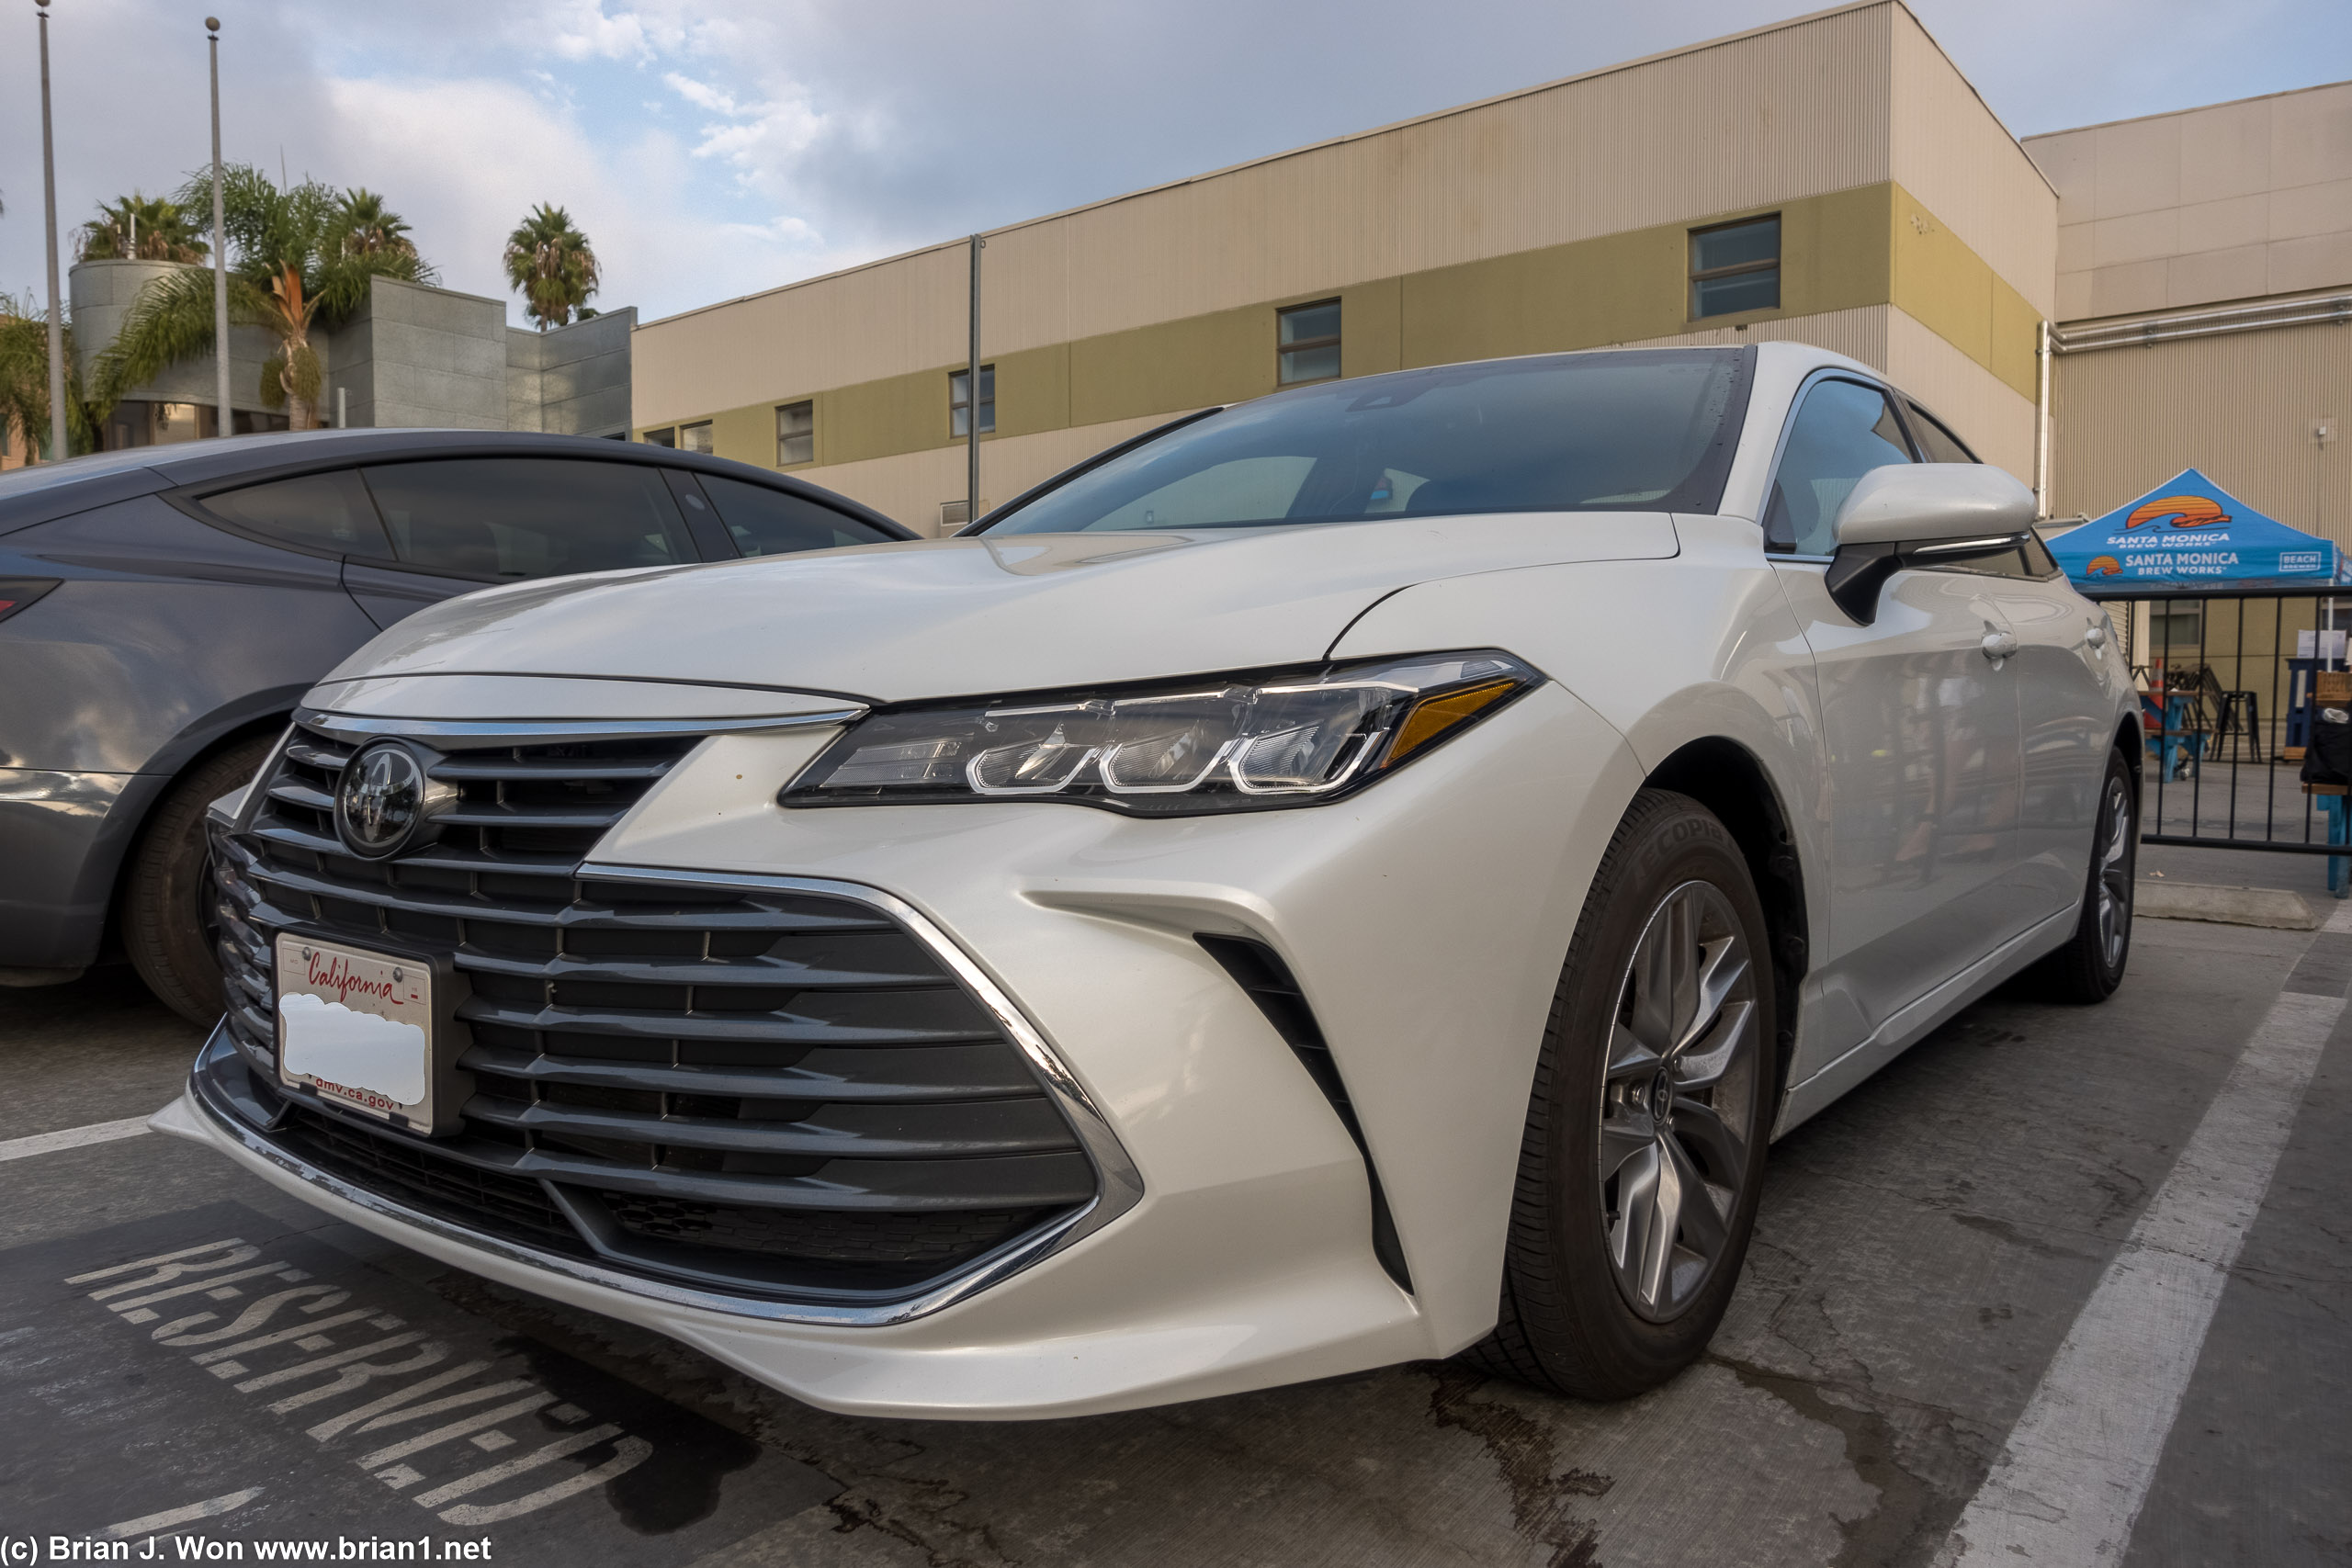 Toyota Avalon isn't bad, but also quite ordinary.